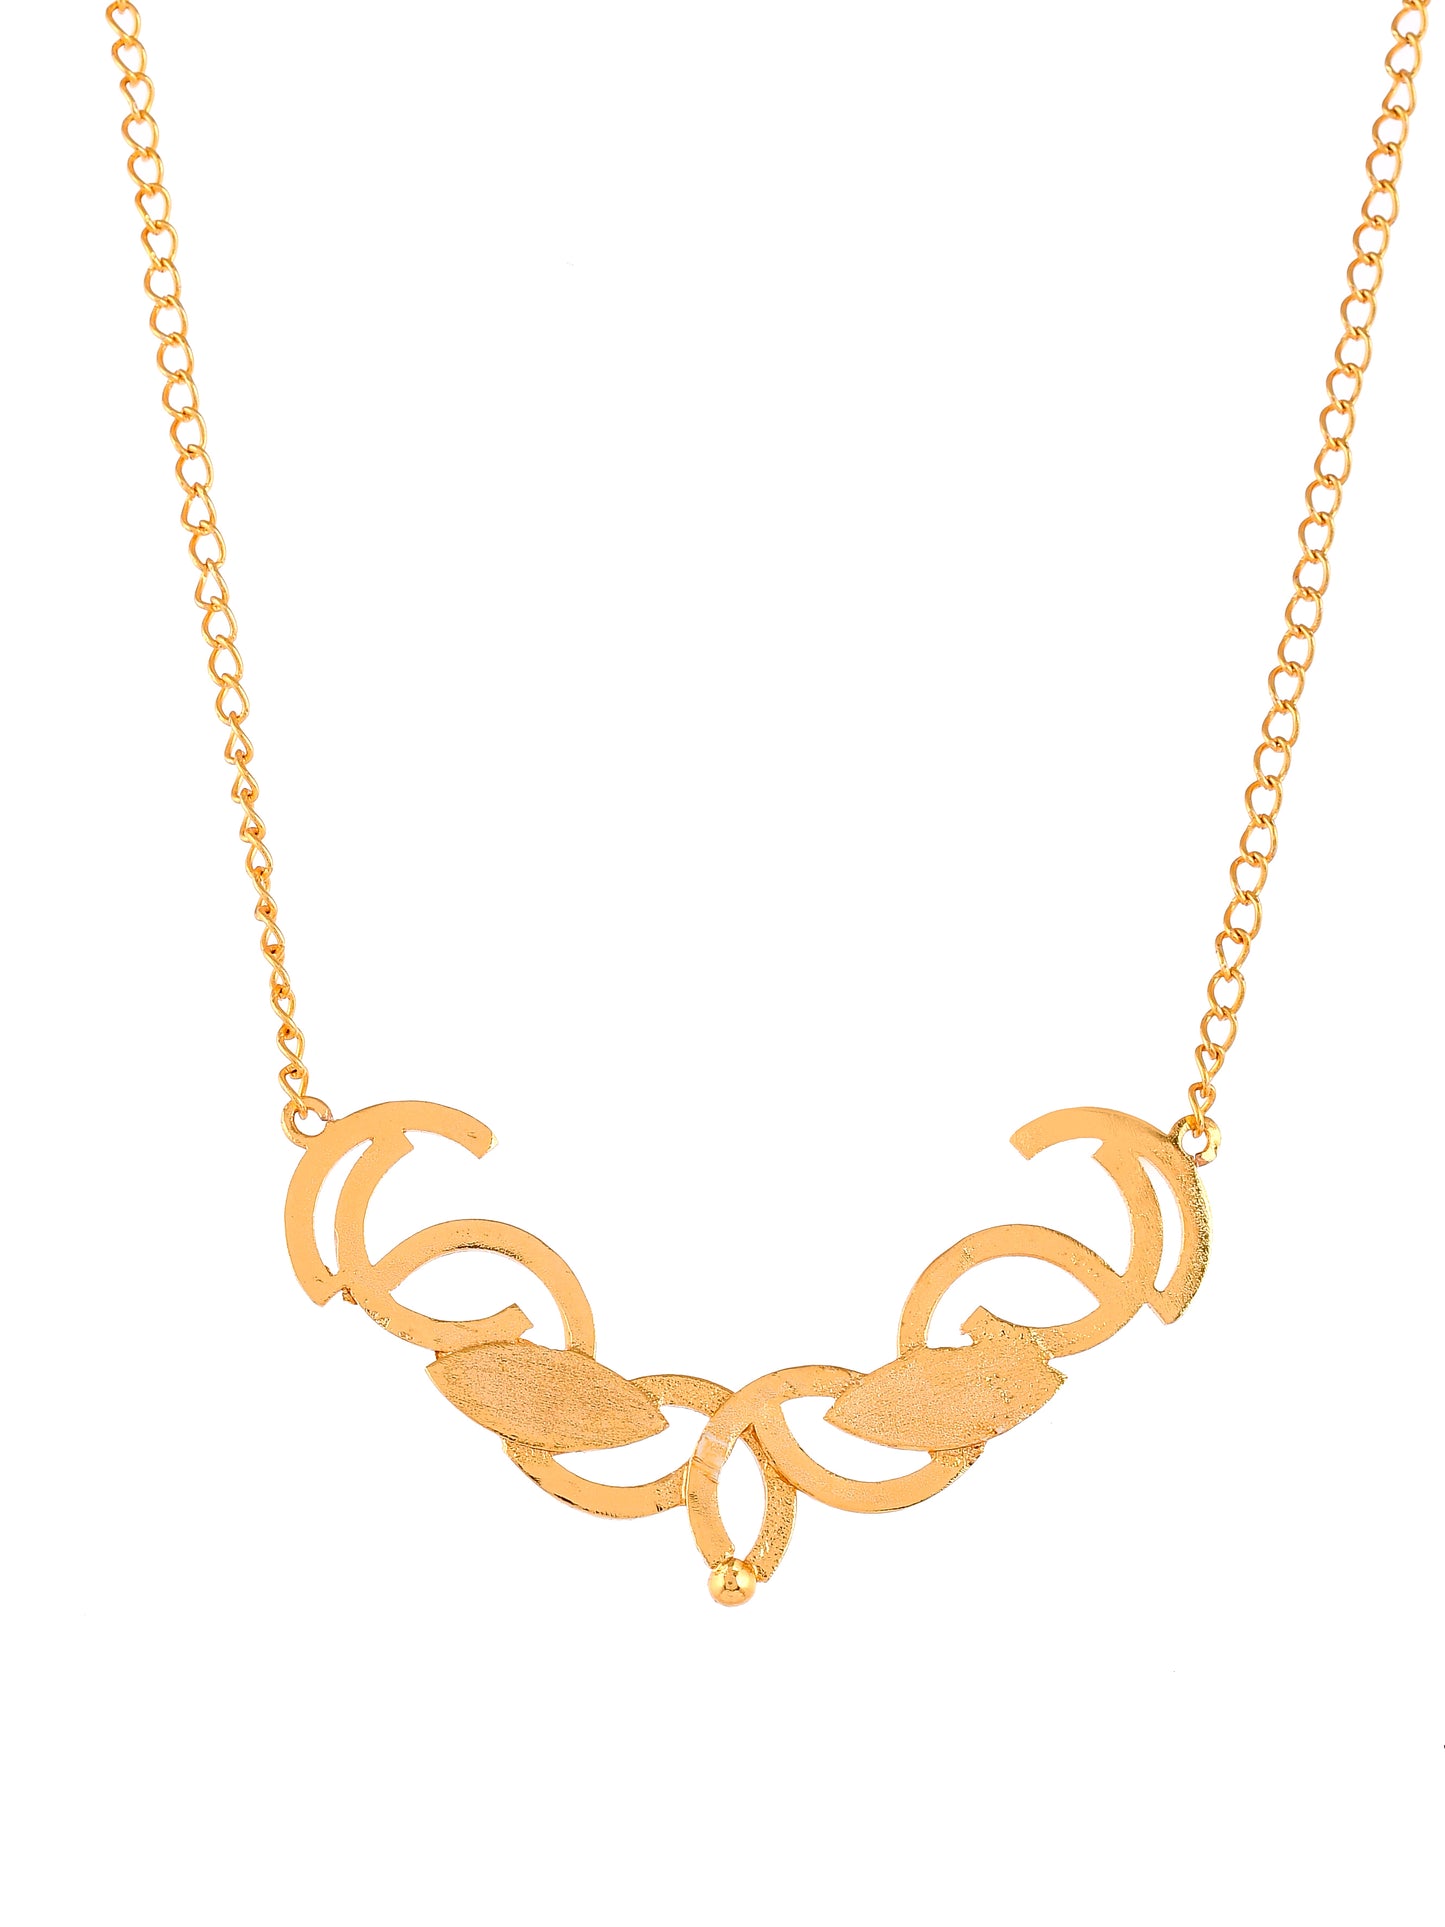 Gold Plated Prosperity Pendant Chain